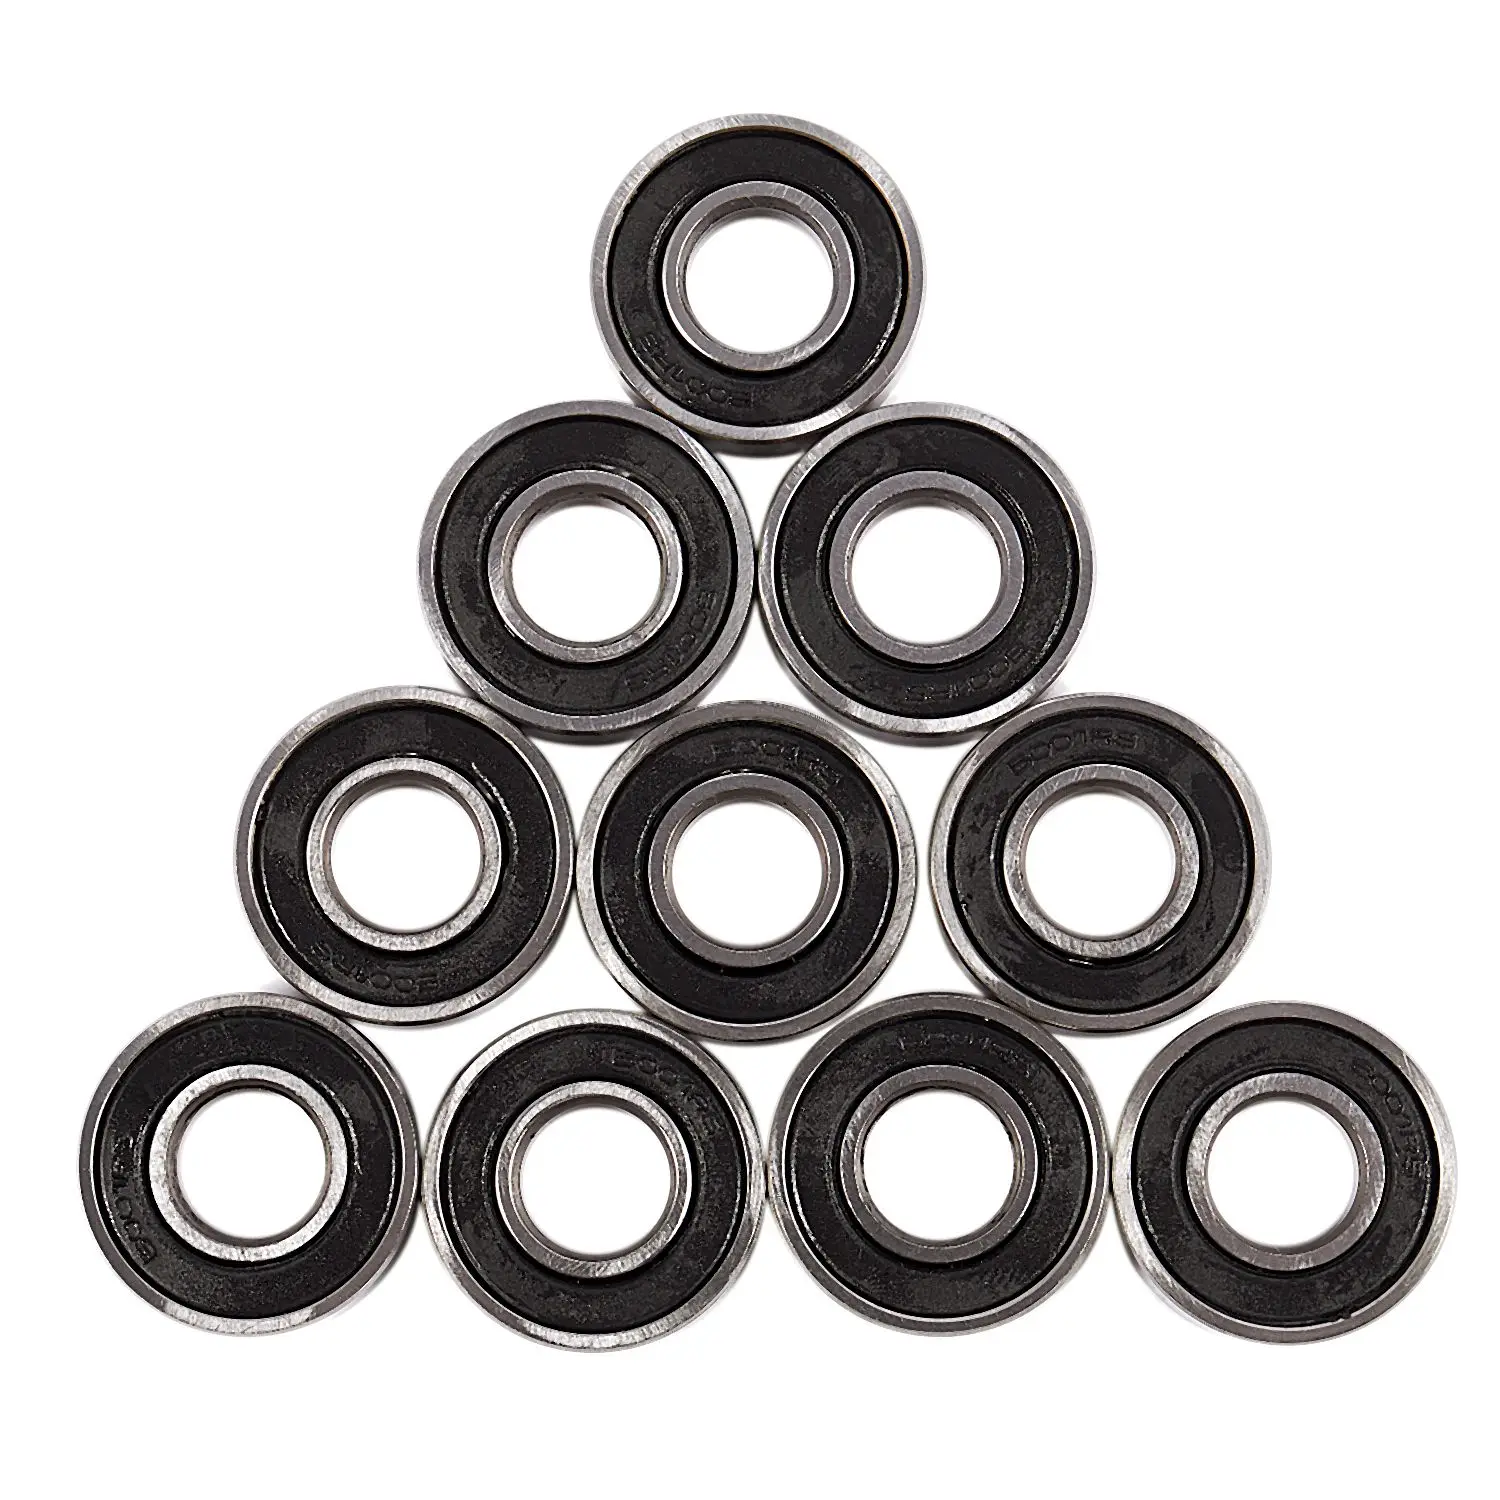 

6001RS Deep Groove Ball Bearing 28 x 12 x 8 mm 10 Pieces, Silver & Black